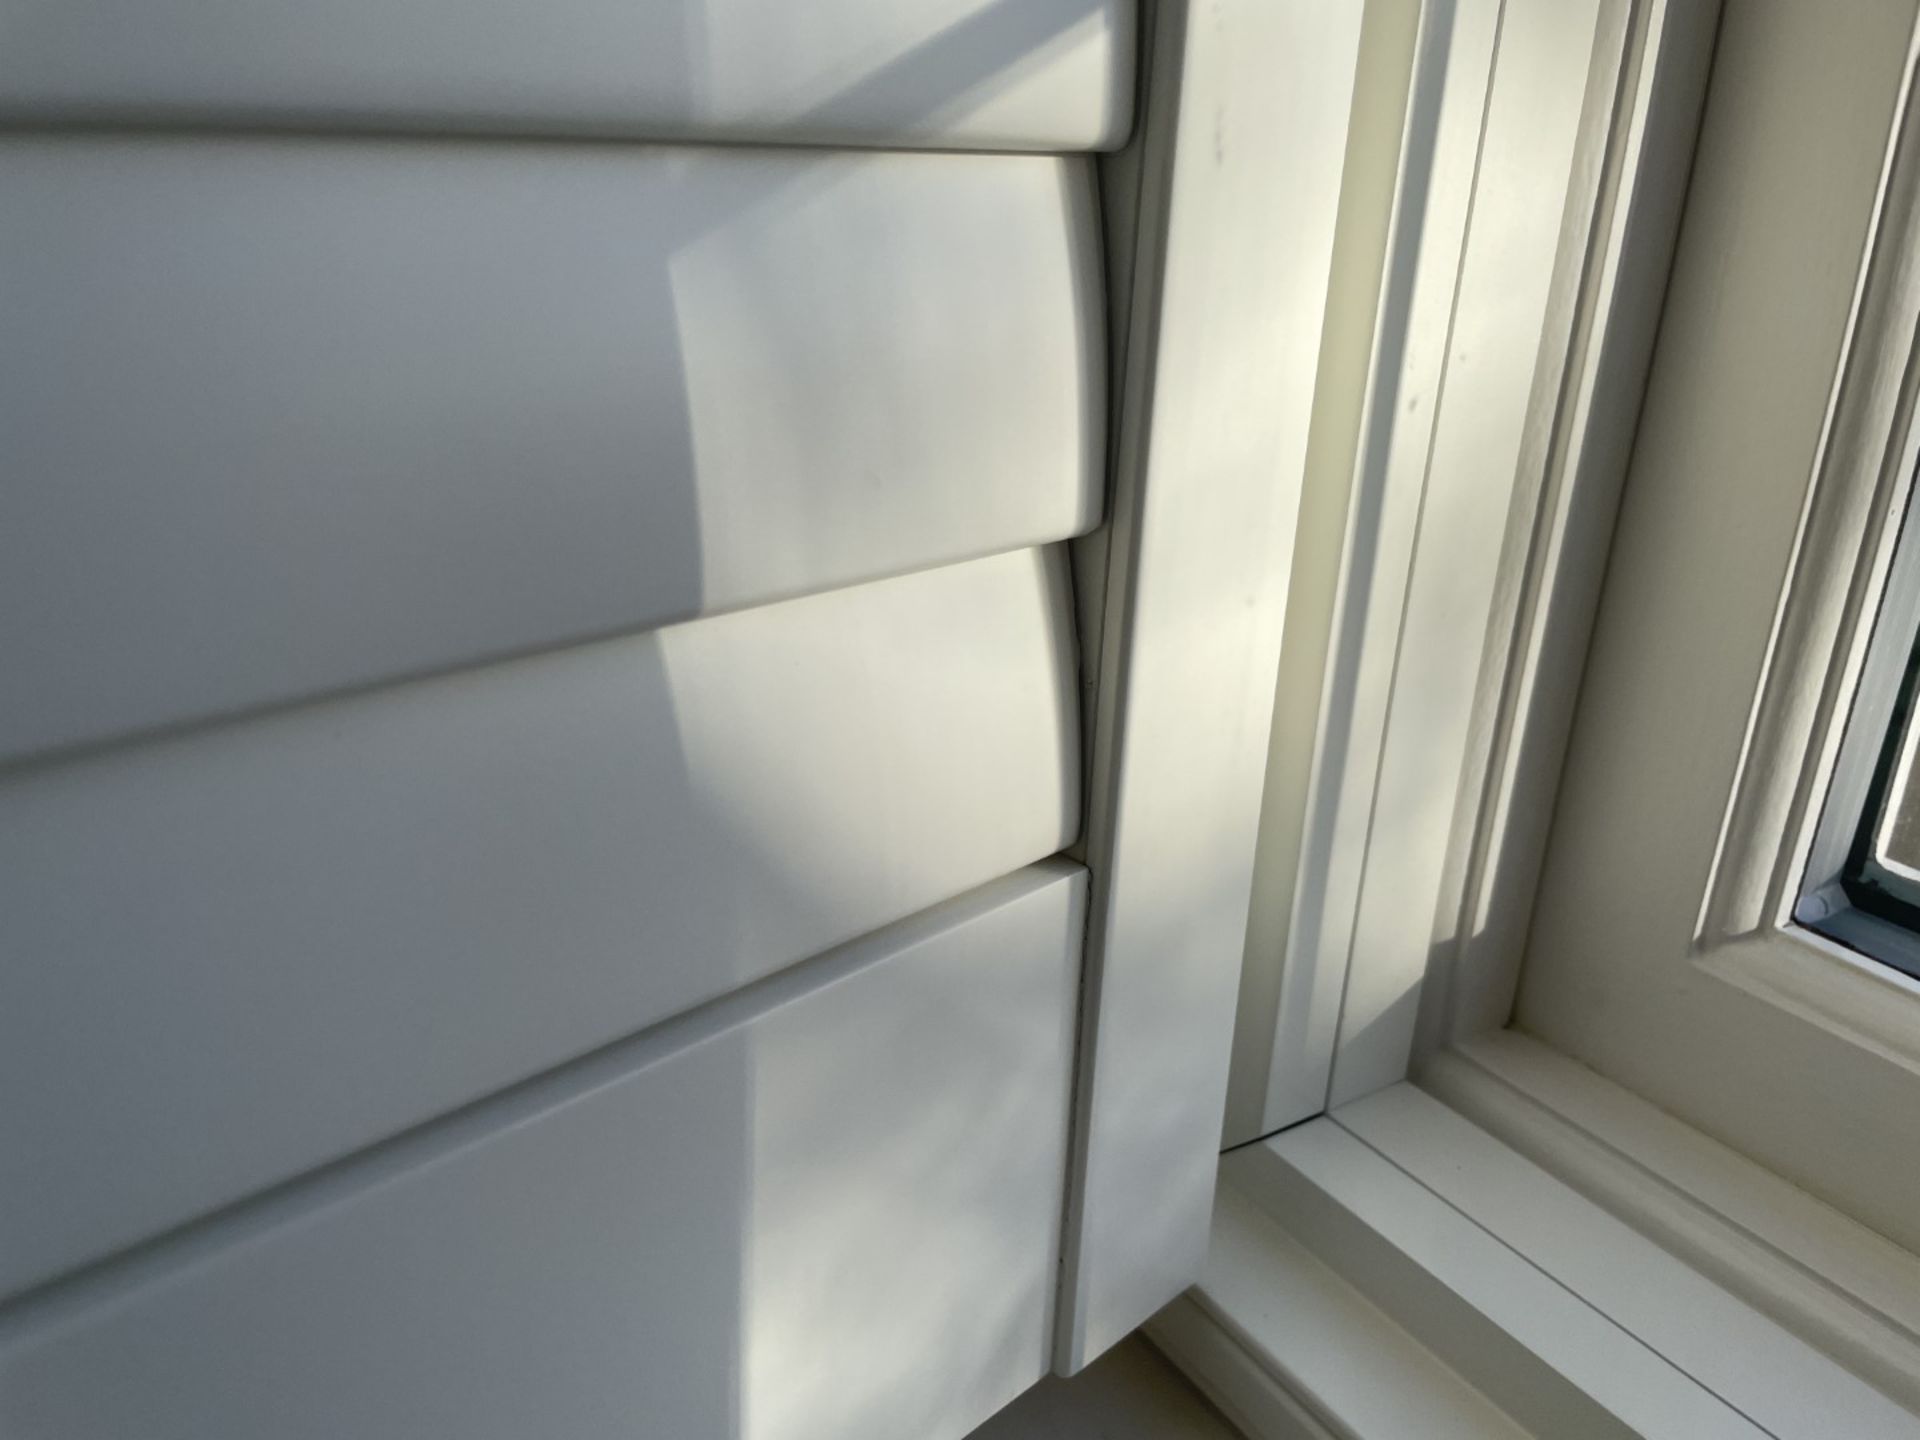 1 x Hardwood Timber Double Glazed Window Frames fitted with Shutter Blinds, In White - Ref: PAN101 - Image 14 of 23